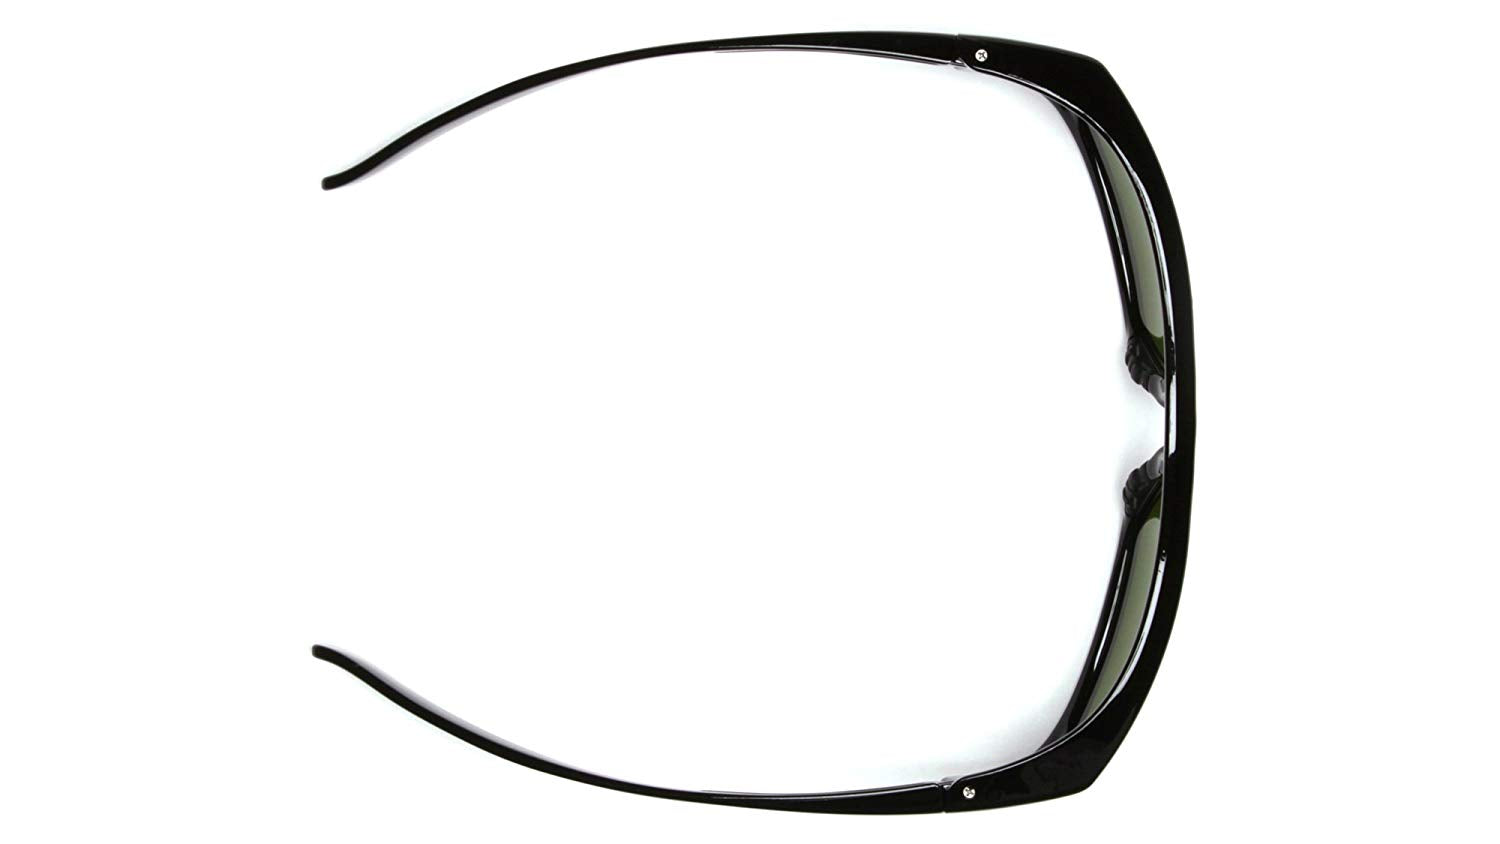 Pyramex Safety SB7910DRX Emerge Black Frame with Clear +2.0 Lens - Glasses India Online